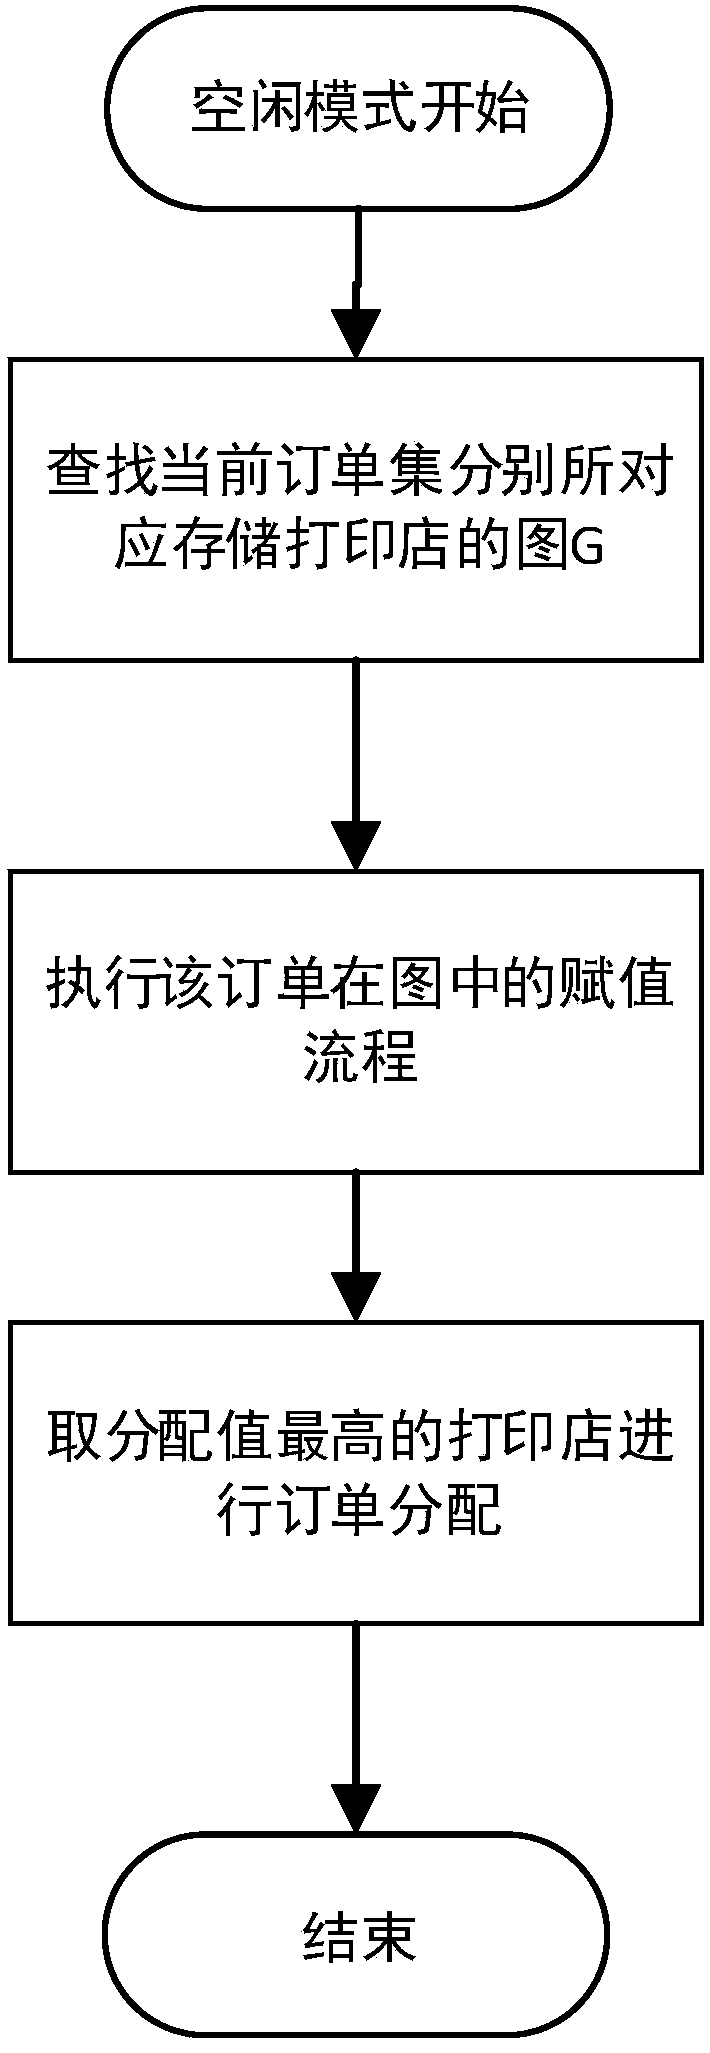 Diagram-based auction algorithm with cutoff constraint in cloud printing business